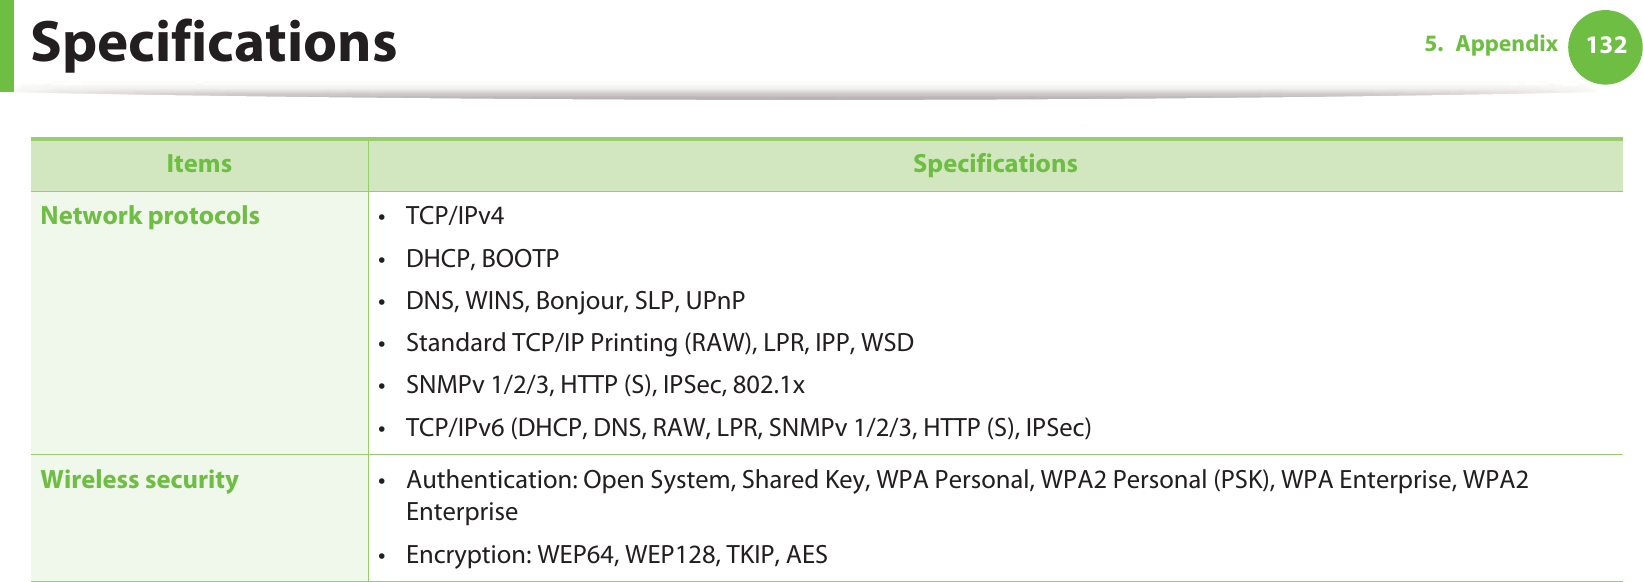 Specifications 1325. Appendix Network protocols •TCP/IPv4• DHCP, BOOTP• DNS, WINS, Bonjour, SLP, UPnP• Standard TCP/IP Printing (RAW), LPR, IPP, WSD• SNMPv 1/2/3, HTTP (S), IPSec, 802.1x• TCP/IPv6 (DHCP, DNS, RAW, LPR, SNMPv 1/2/3, HTTP (S), IPSec)Wireless security  • Authentication: Open System, Shared Key, WPA Personal, WPA2 Personal (PSK), WPA Enterprise, WPA2 Enterprise• Encryption: WEP64, WEP128, TKIP, AESItems Specifications